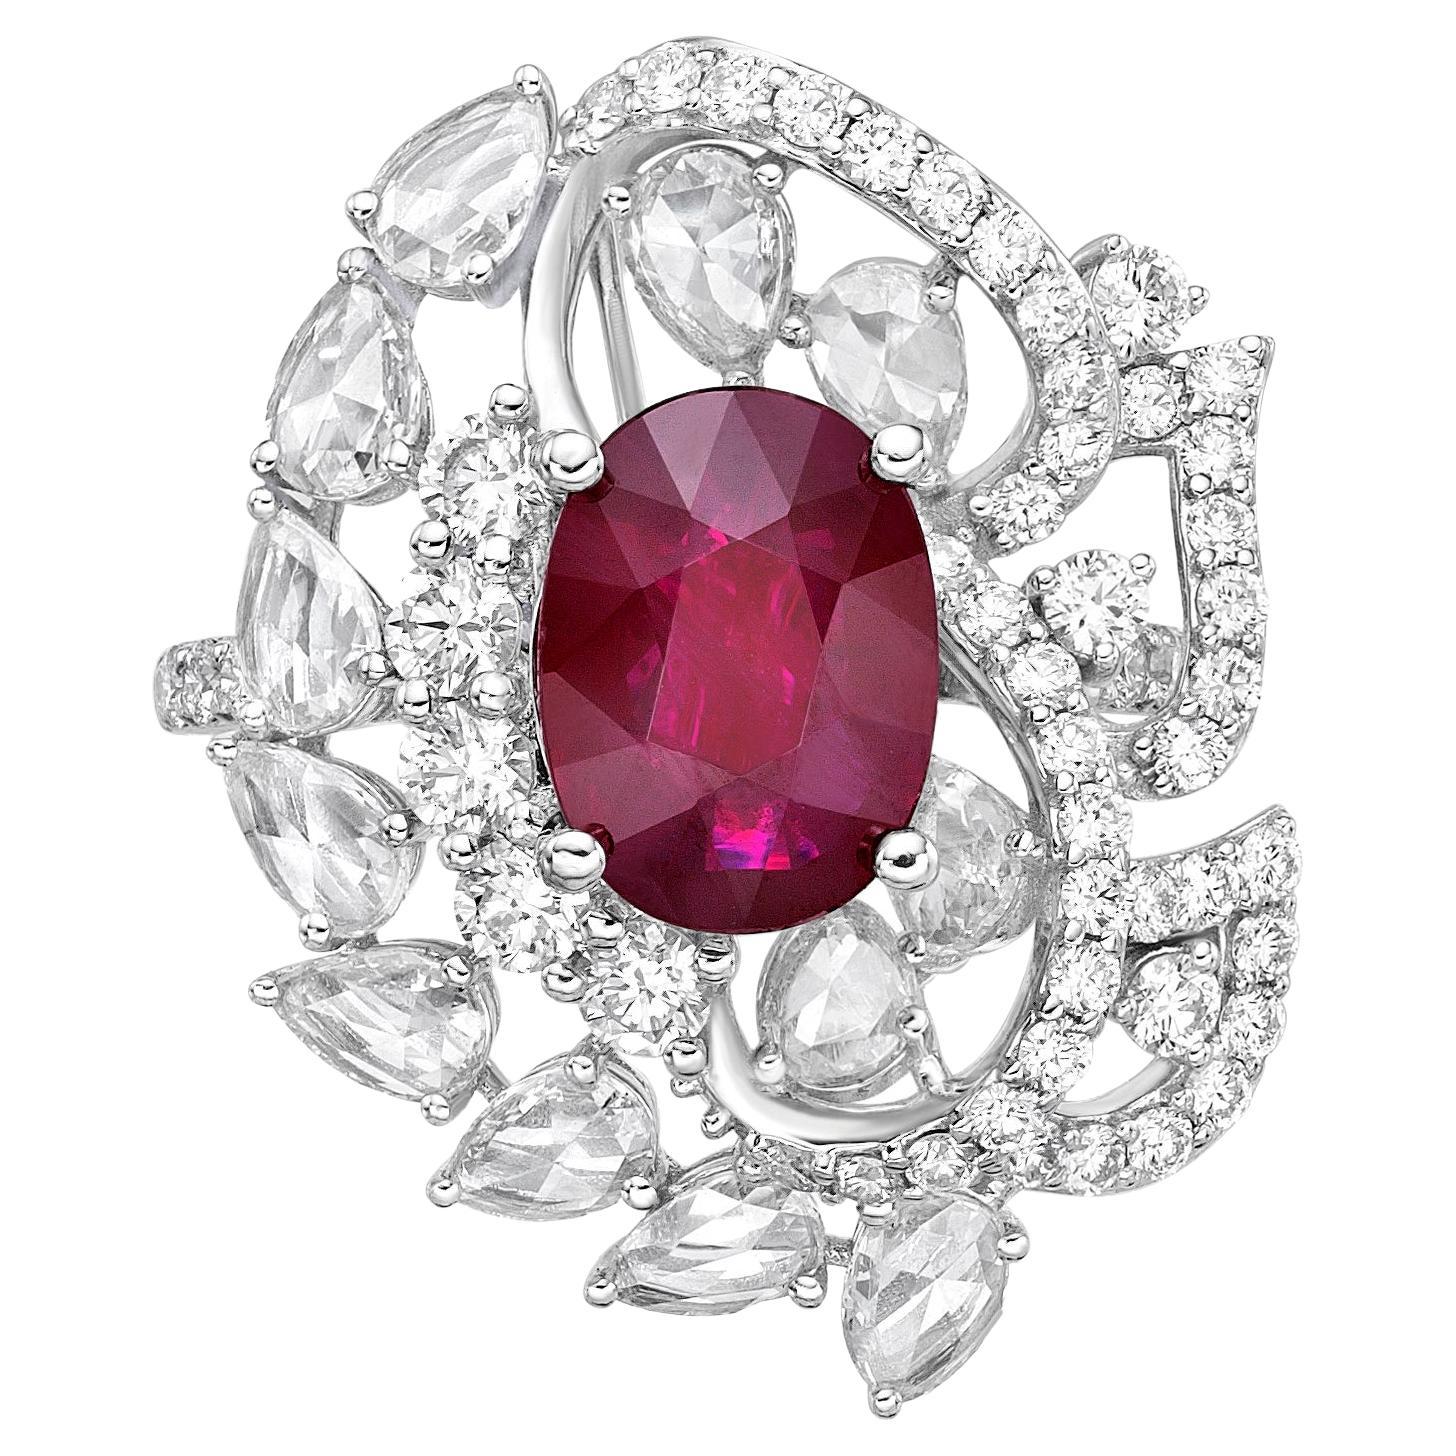 GRS Certified Burma 3.04 Carat Pigeon's Blood Ruby and Diamond Ring